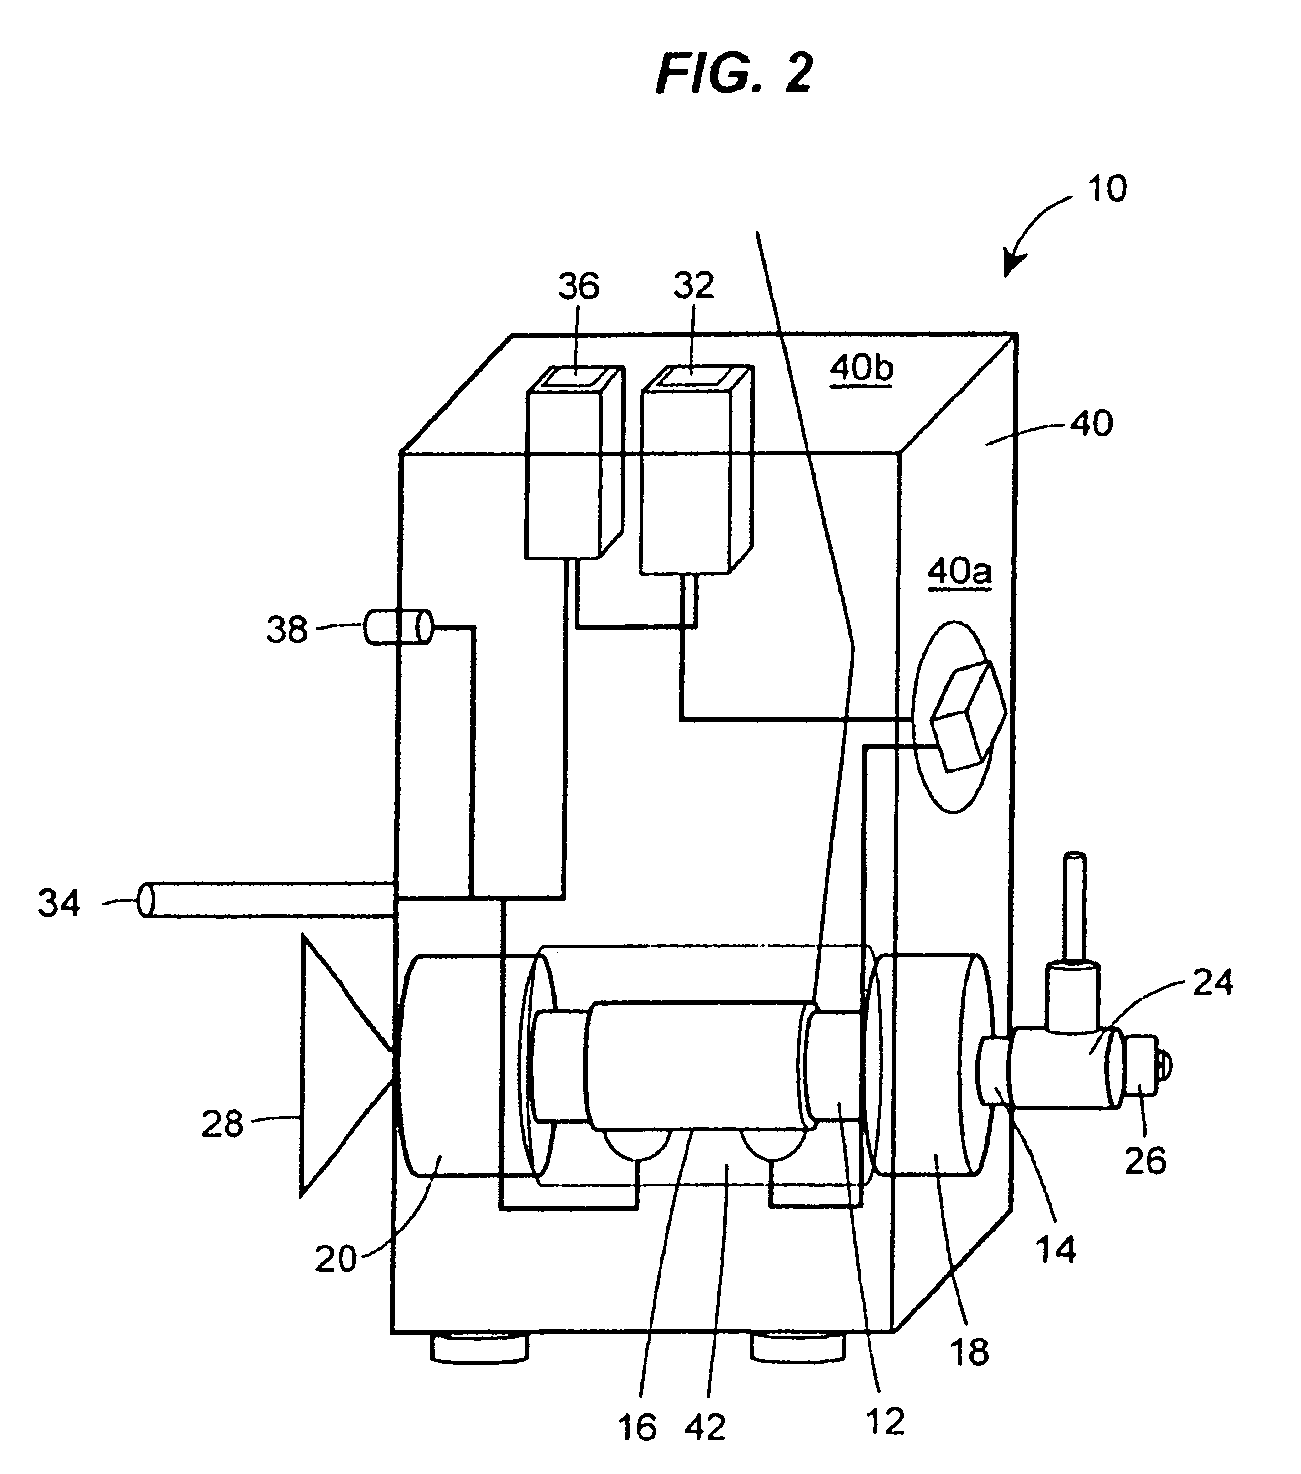 Method and apparatus for extraction, detection, and characterization of vapors from explosives, taggants in explosives, controlled substances, and biohazards